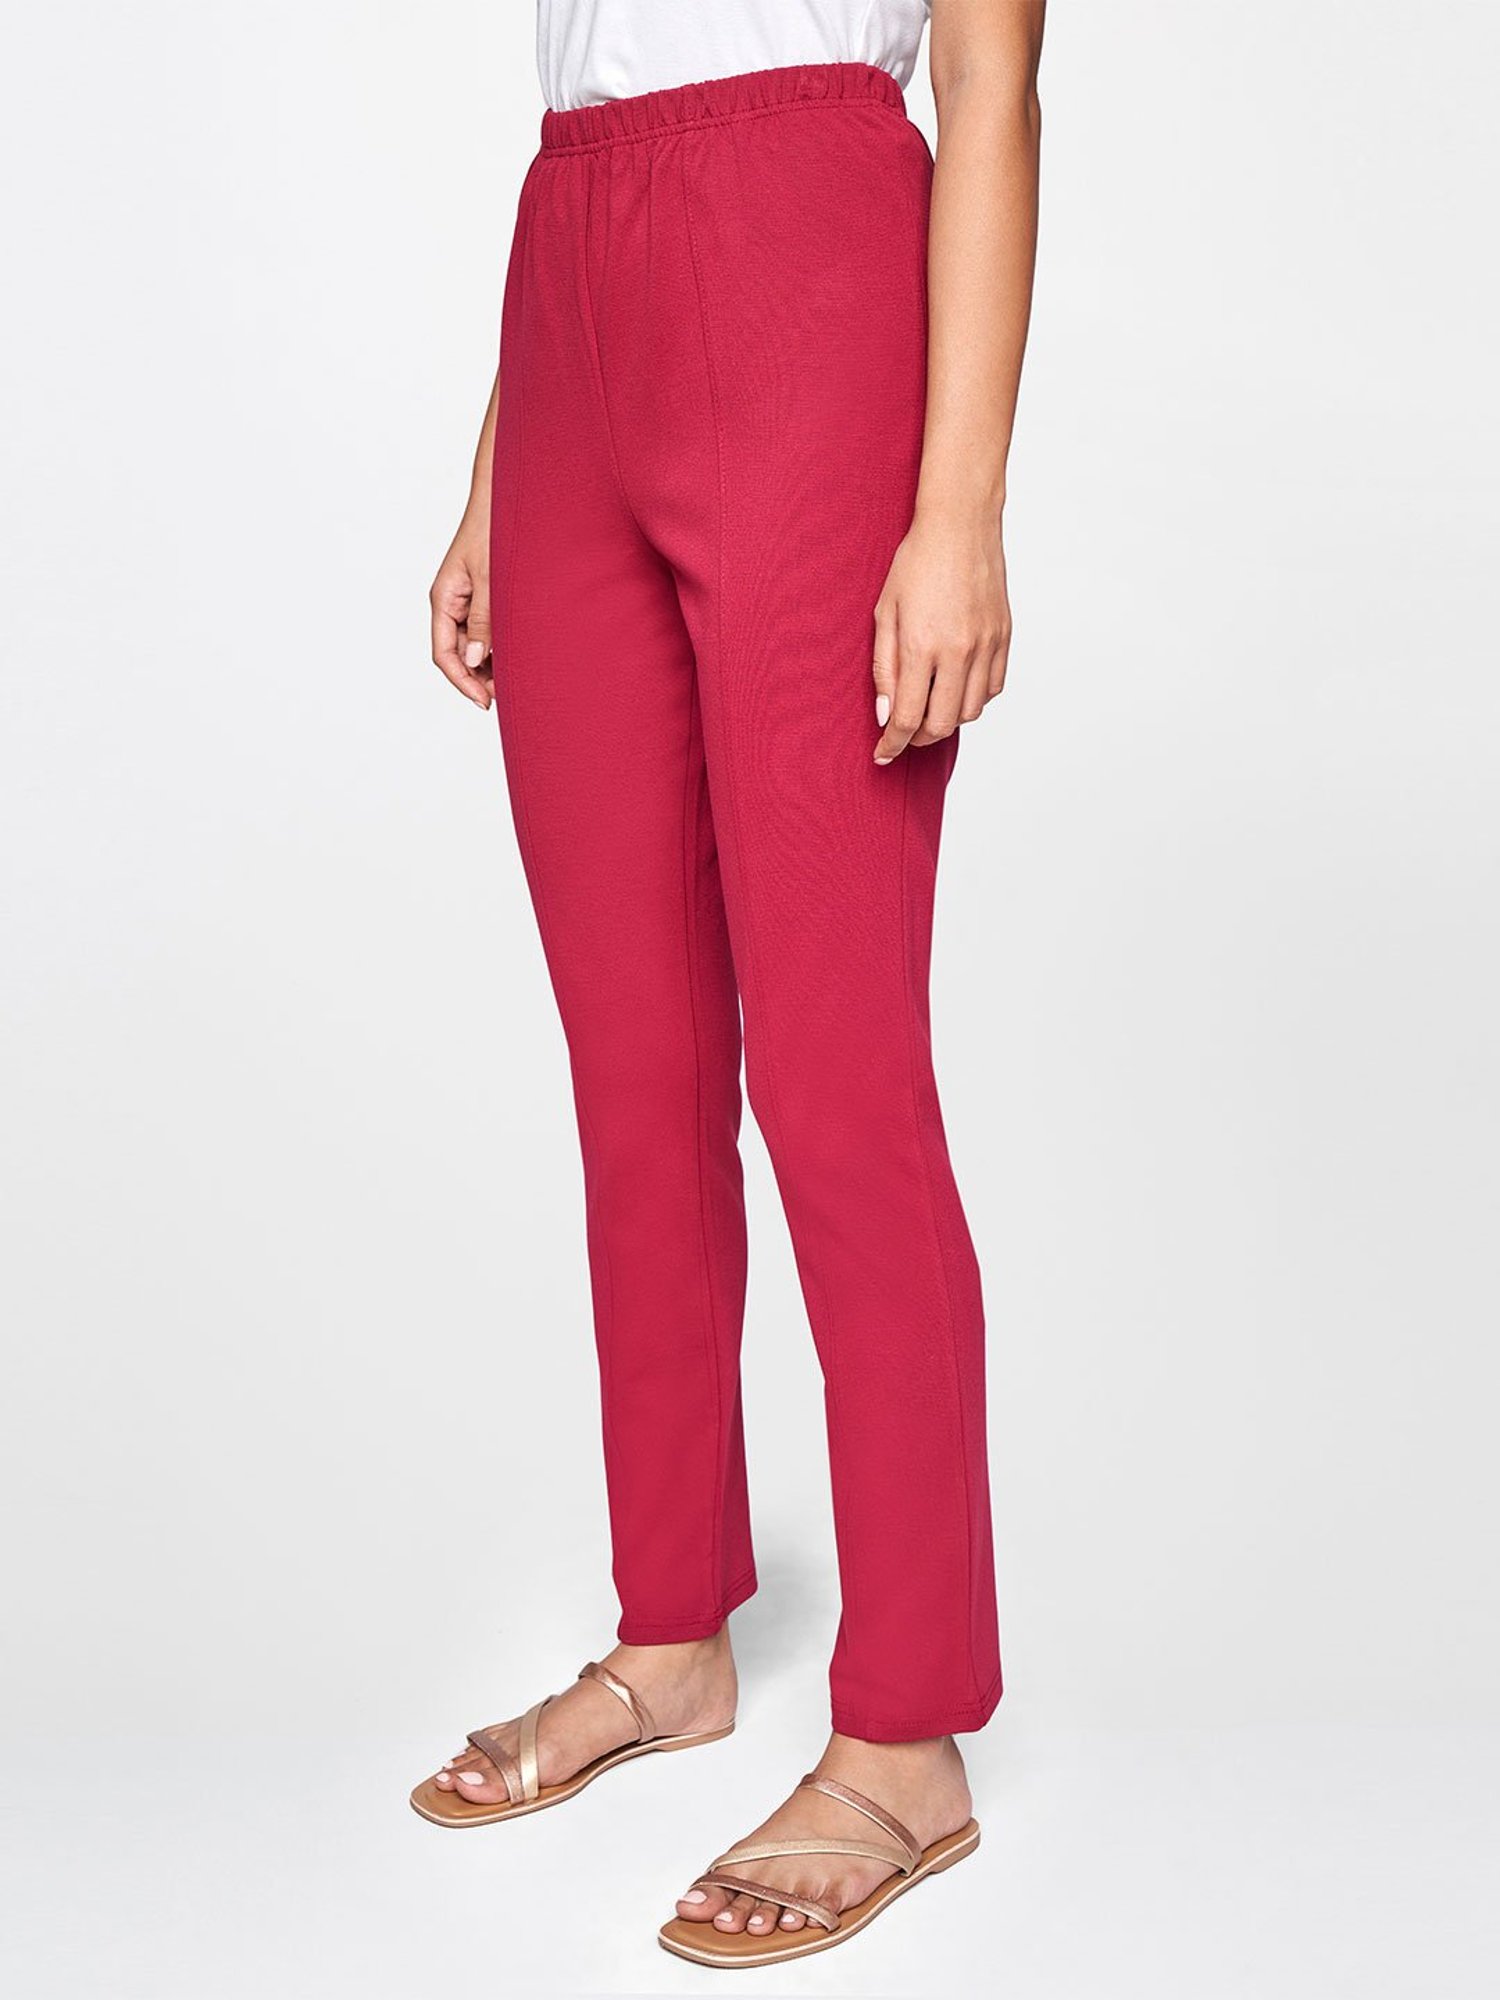 Buy Coral Trousers & Pants for Women by MADAME Online